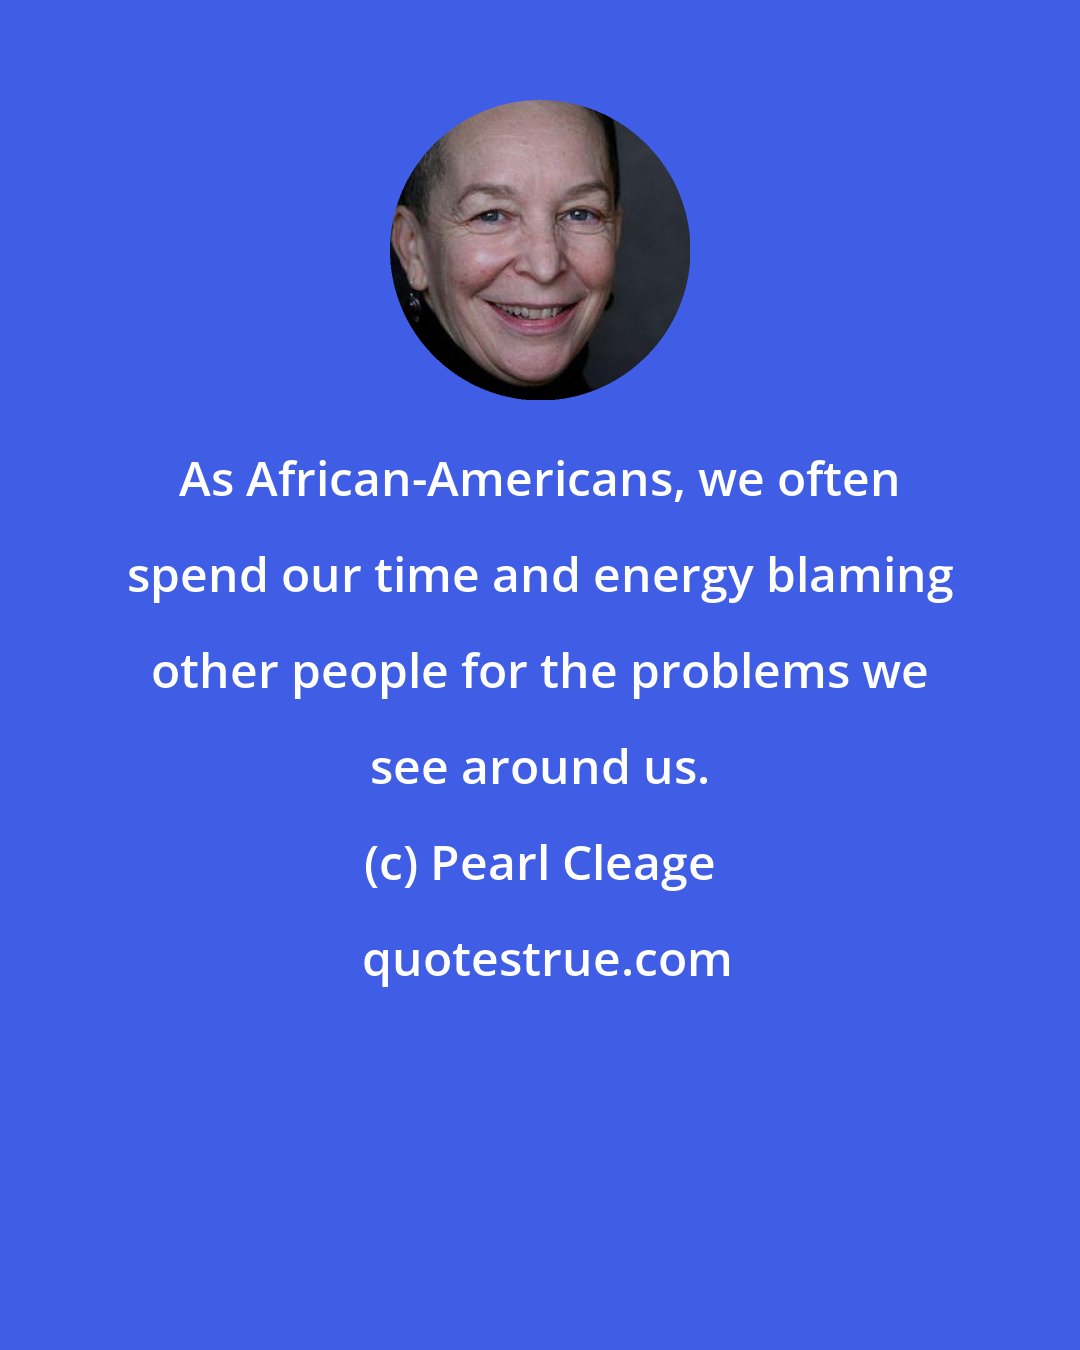 Pearl Cleage: As African-Americans, we often spend our time and energy blaming other people for the problems we see around us.